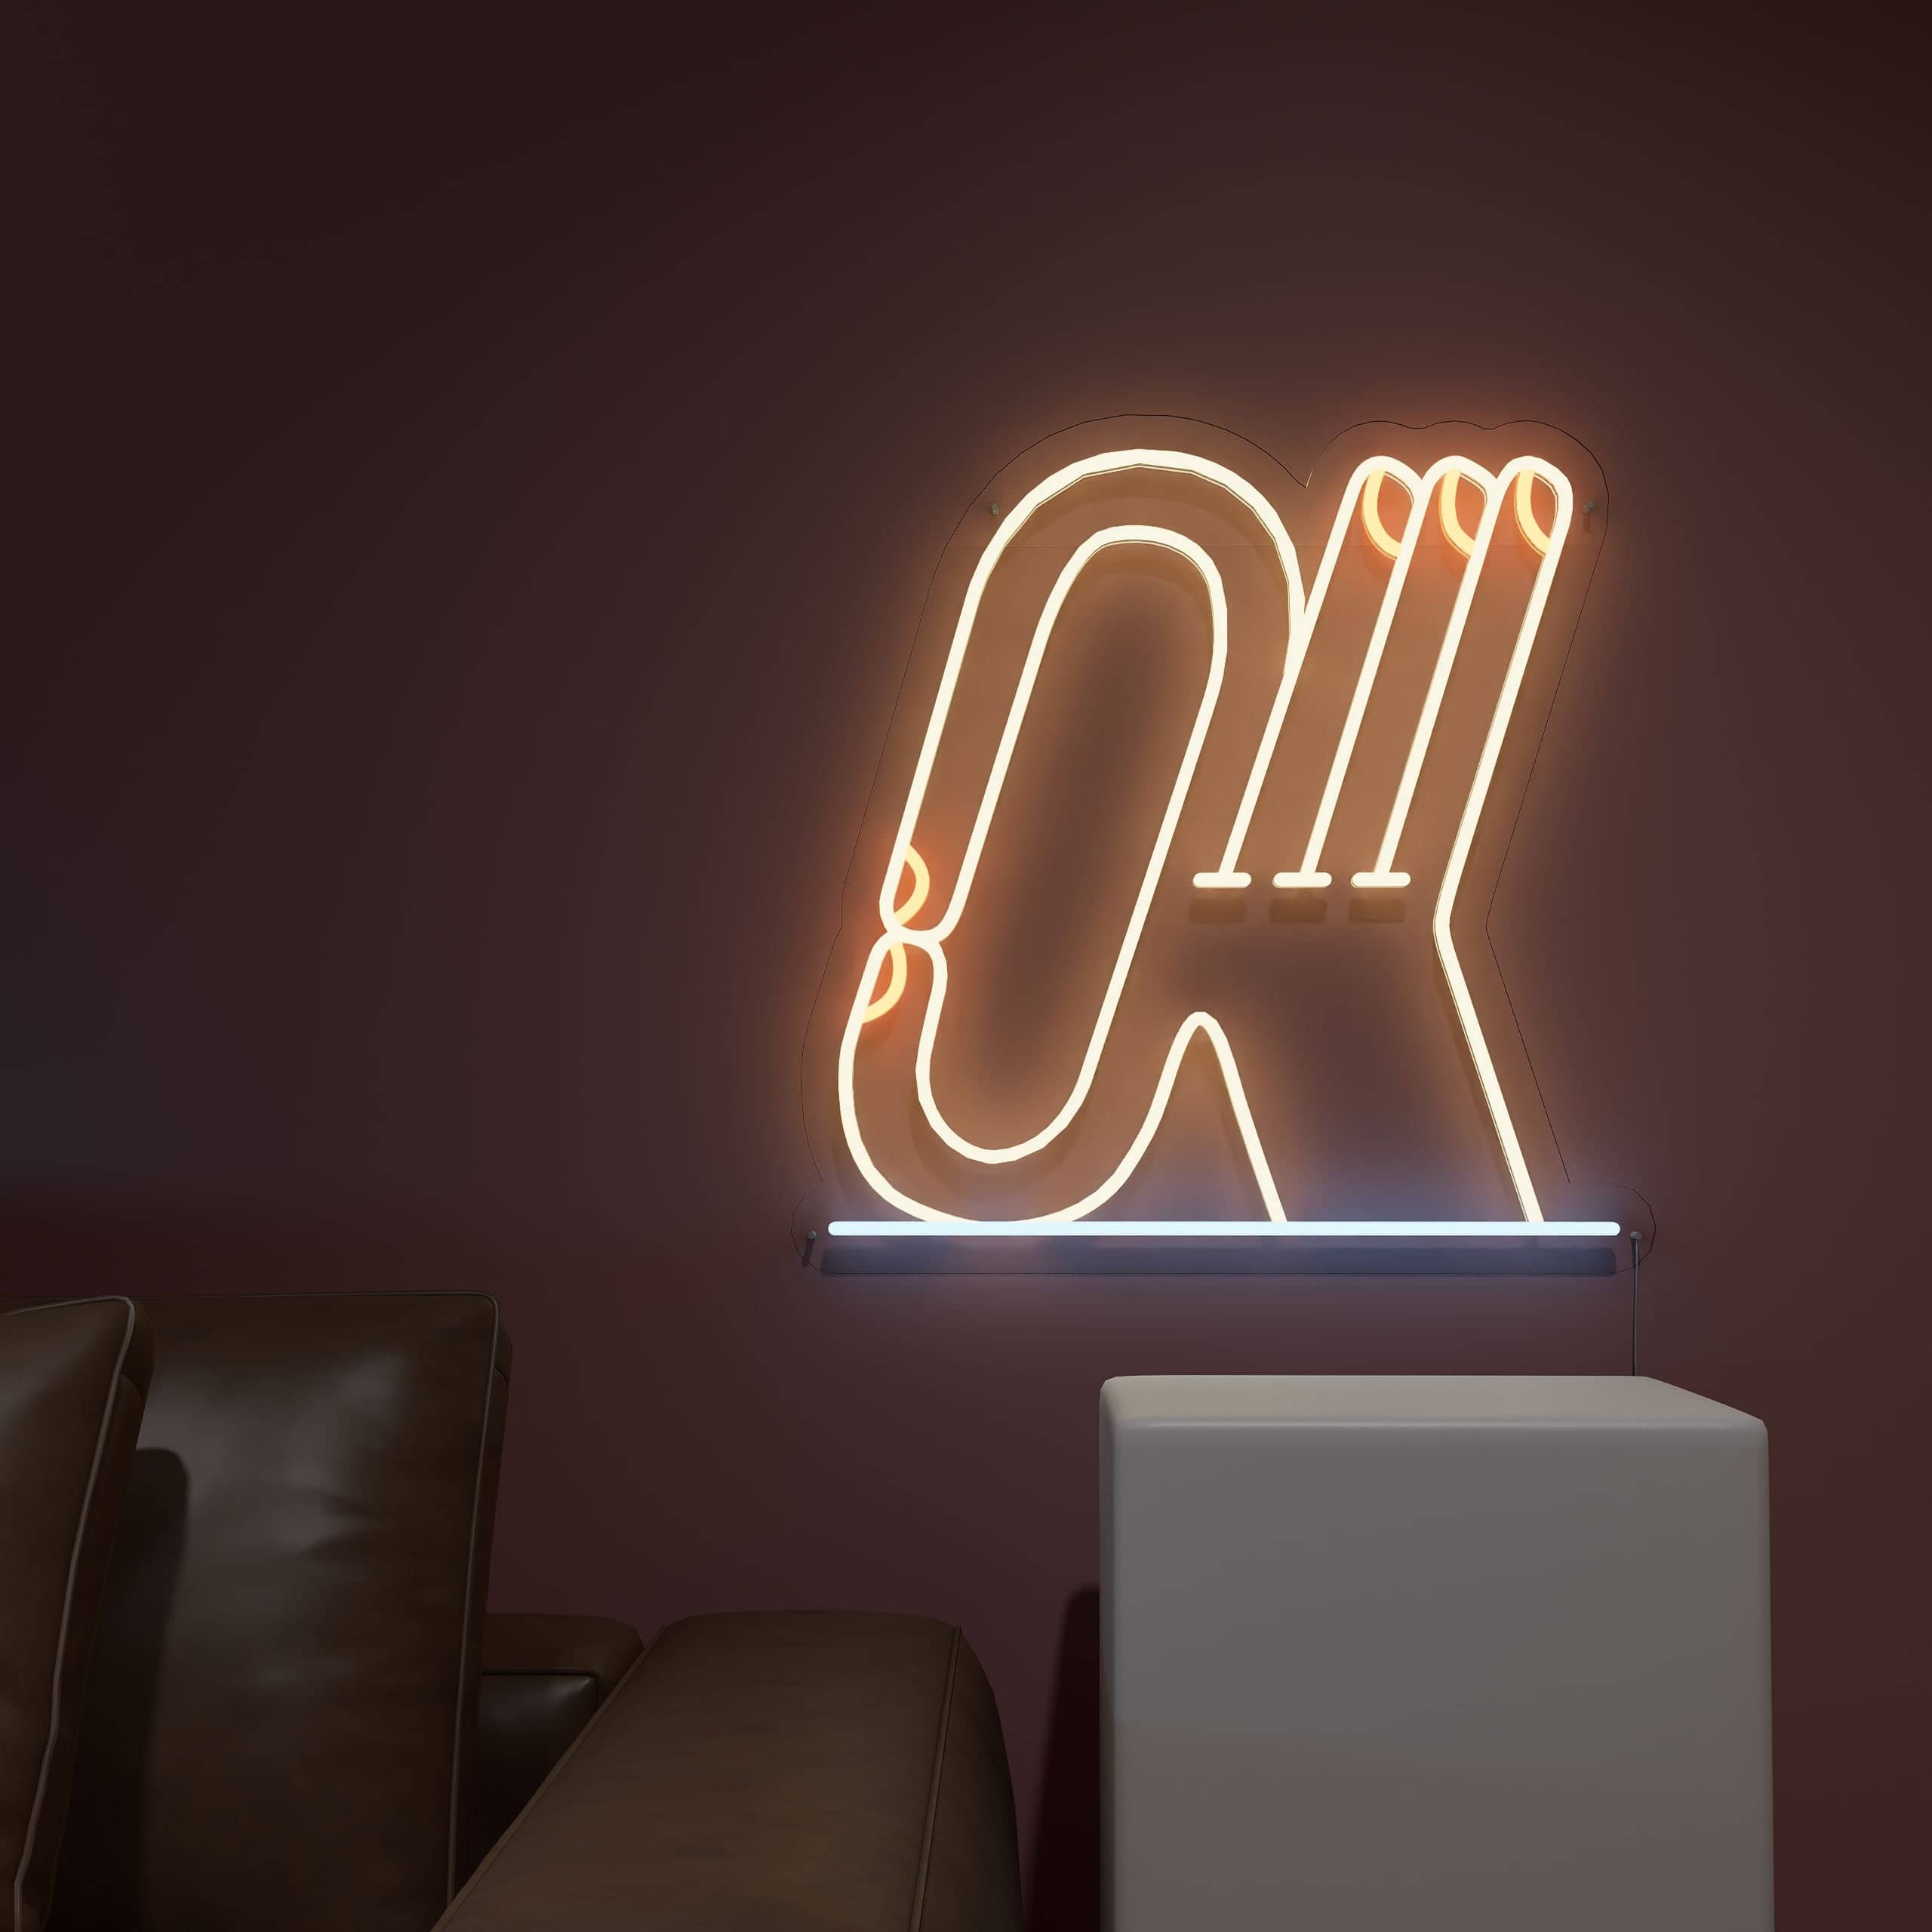 Cozy living room illuminated by It's OK Neon Sign